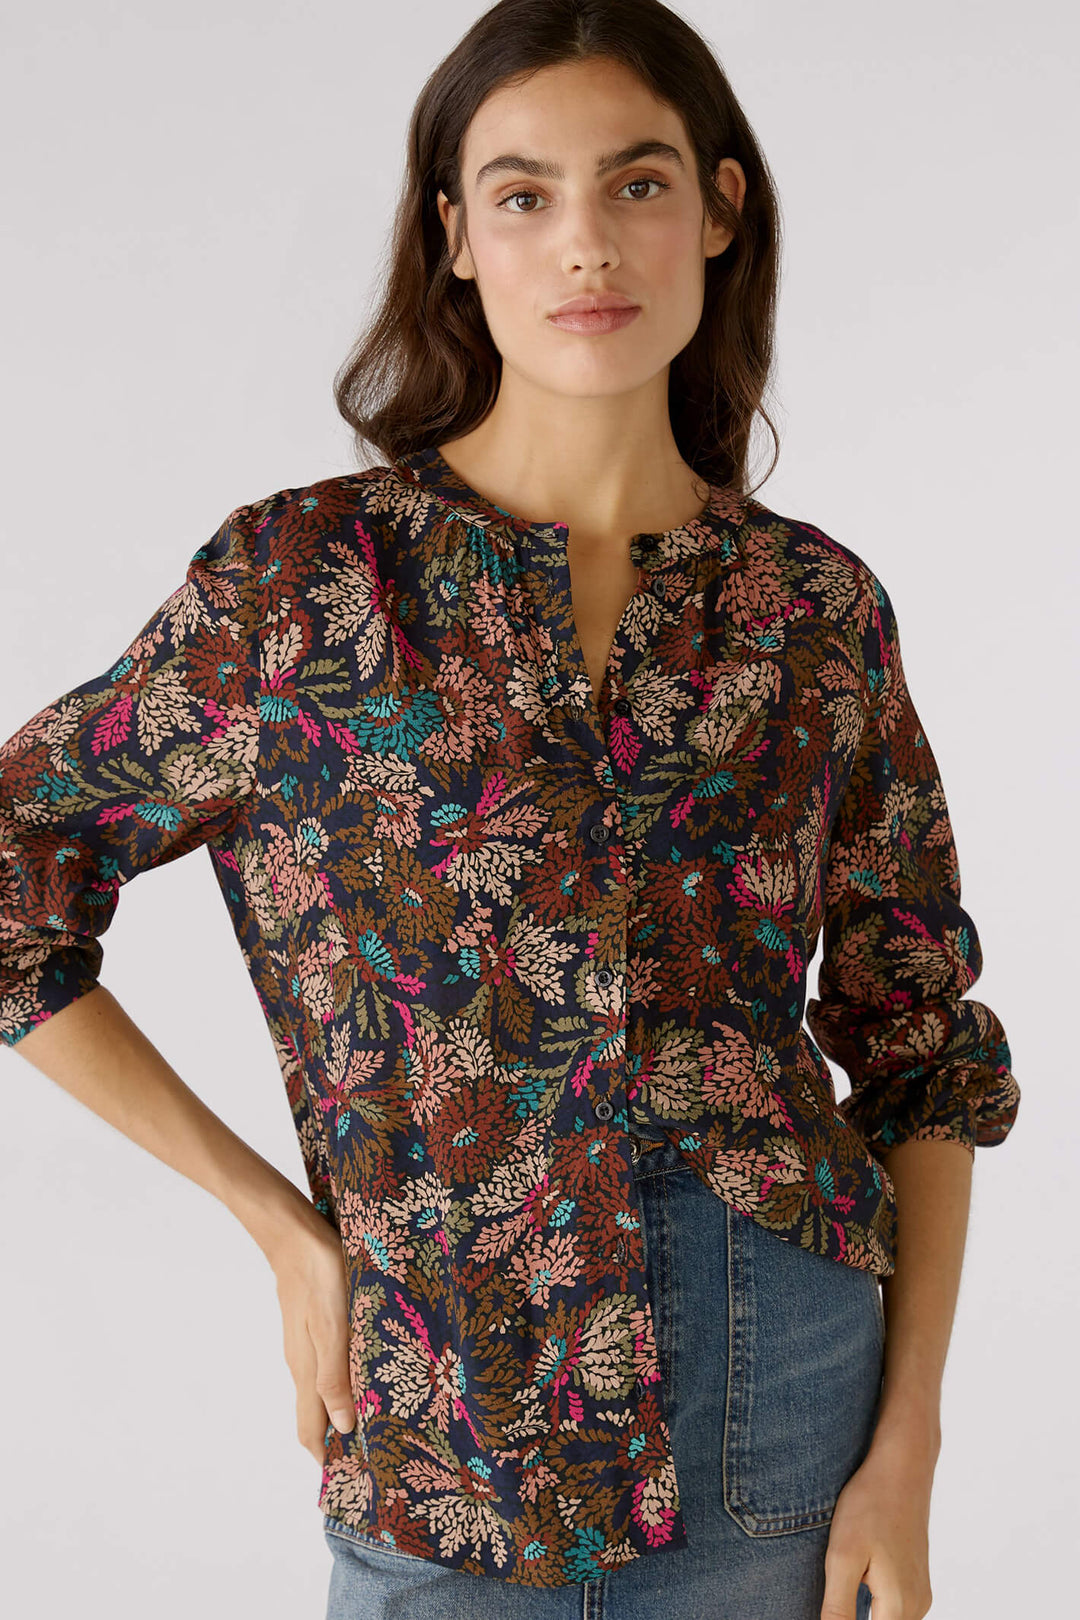 Oui 79319 0843 Brown Red Leaf Print Band Collar Blouse - Shirley Allum Boutique